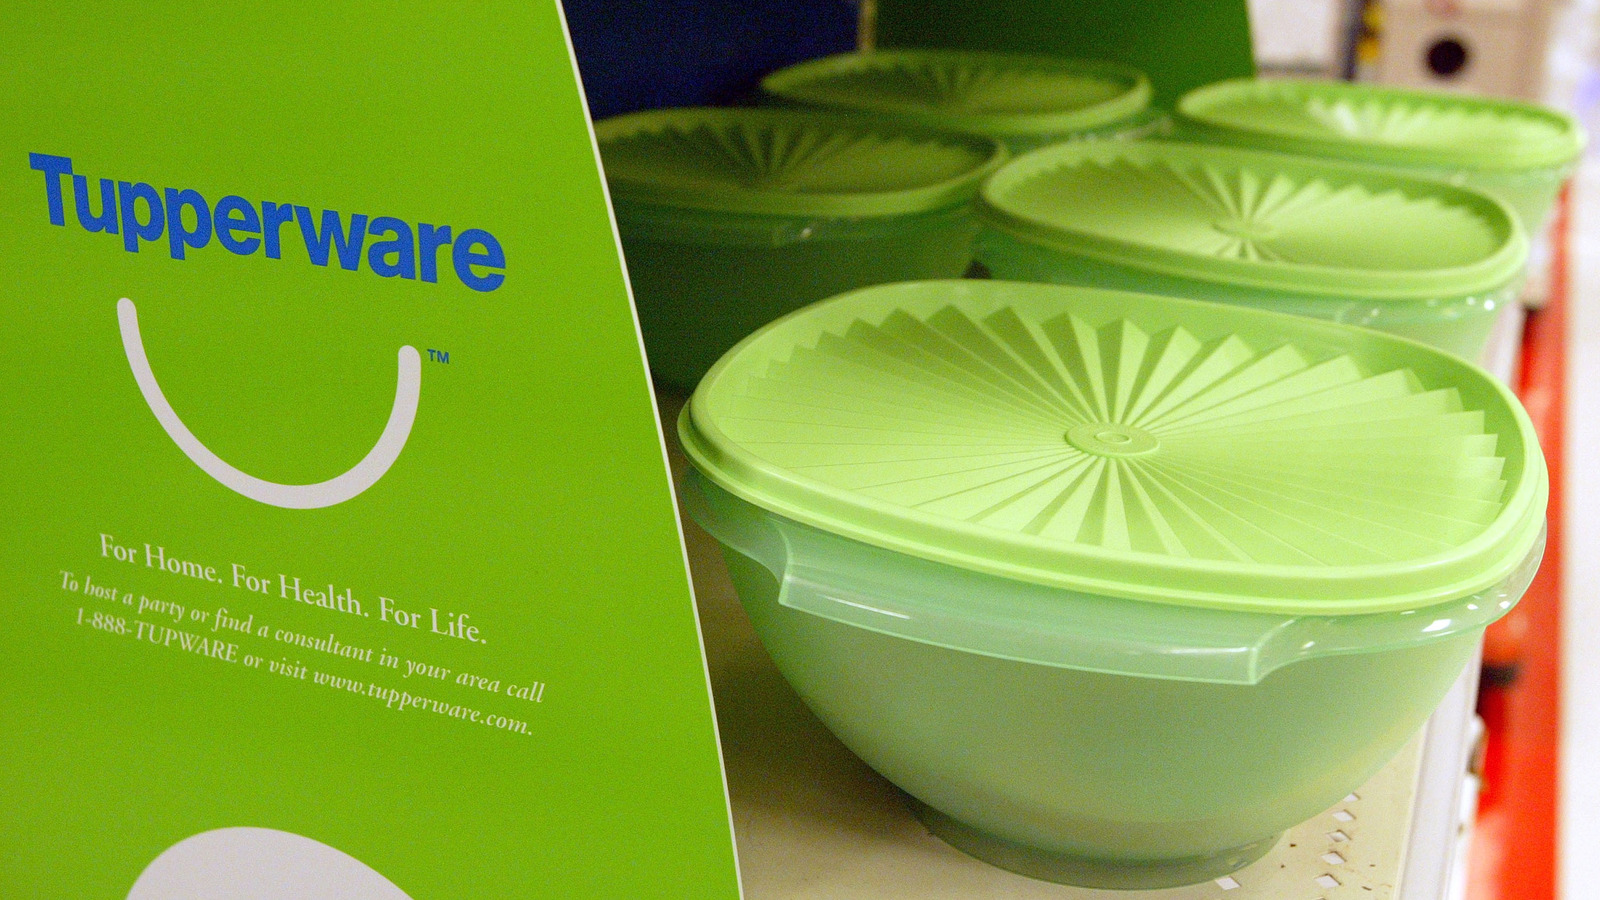 Target's Tupperware Deal 20 Years In The Making